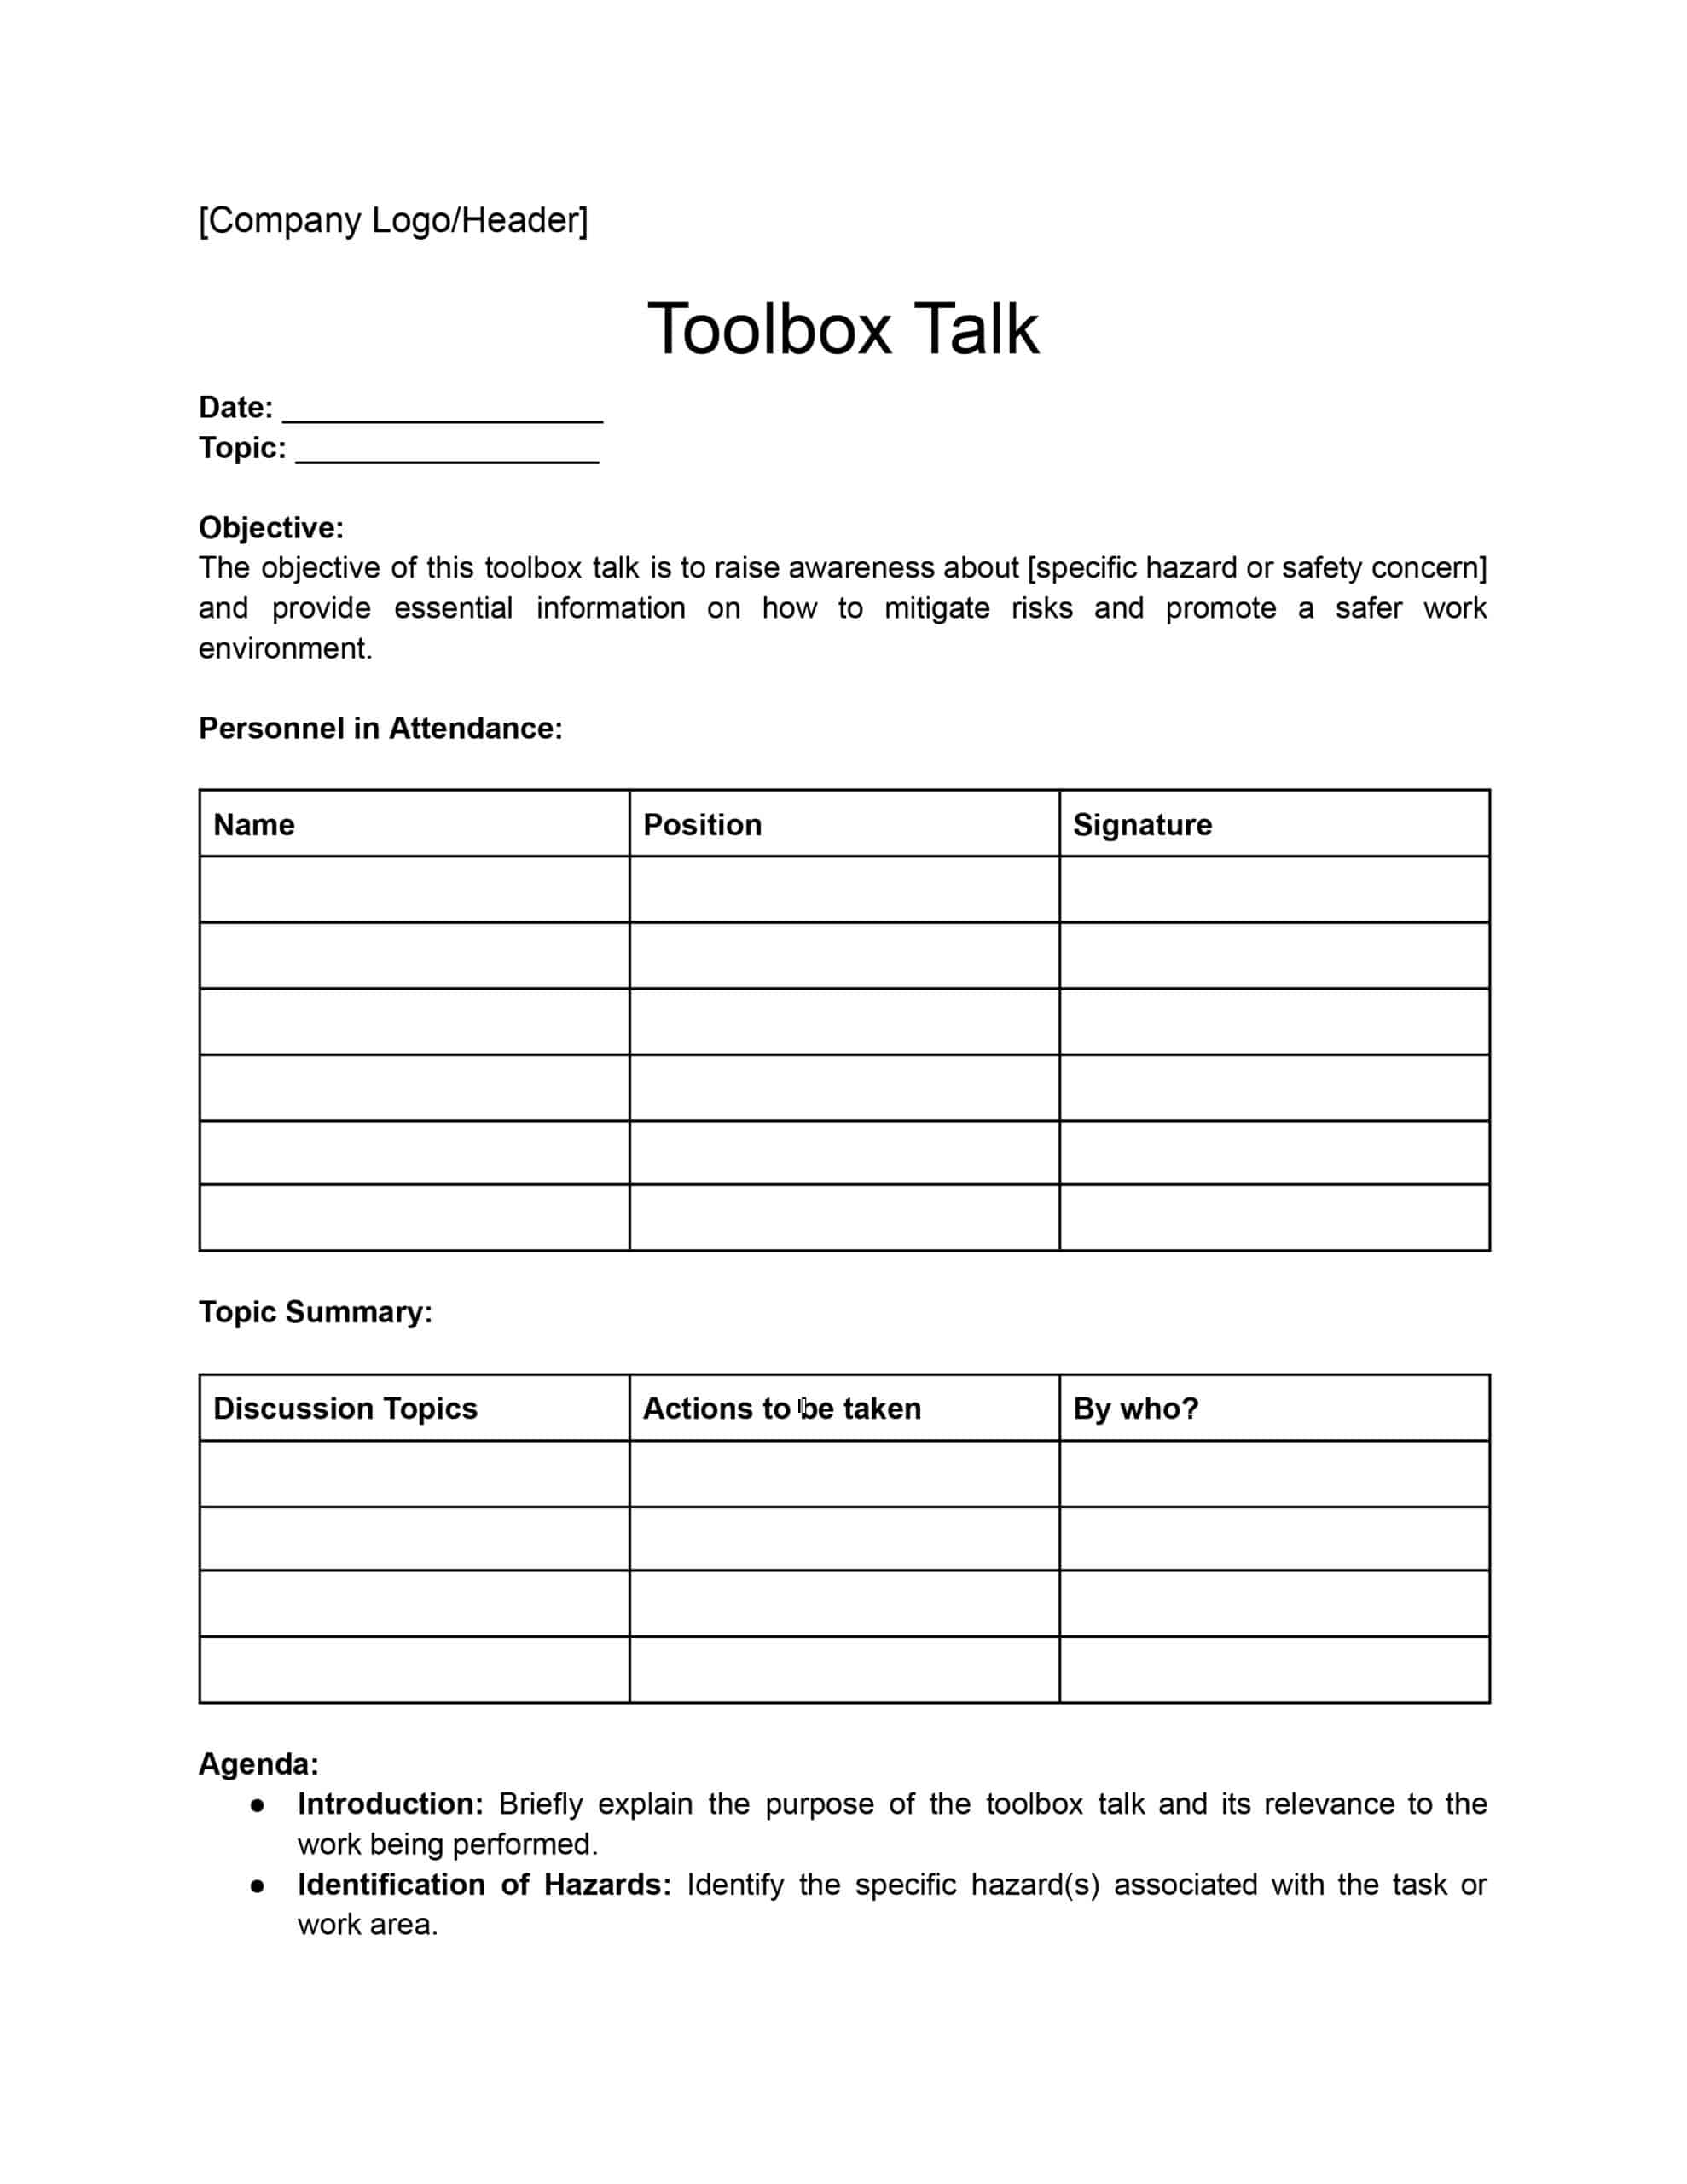 toolbox-talk-templates-download-print-for-free